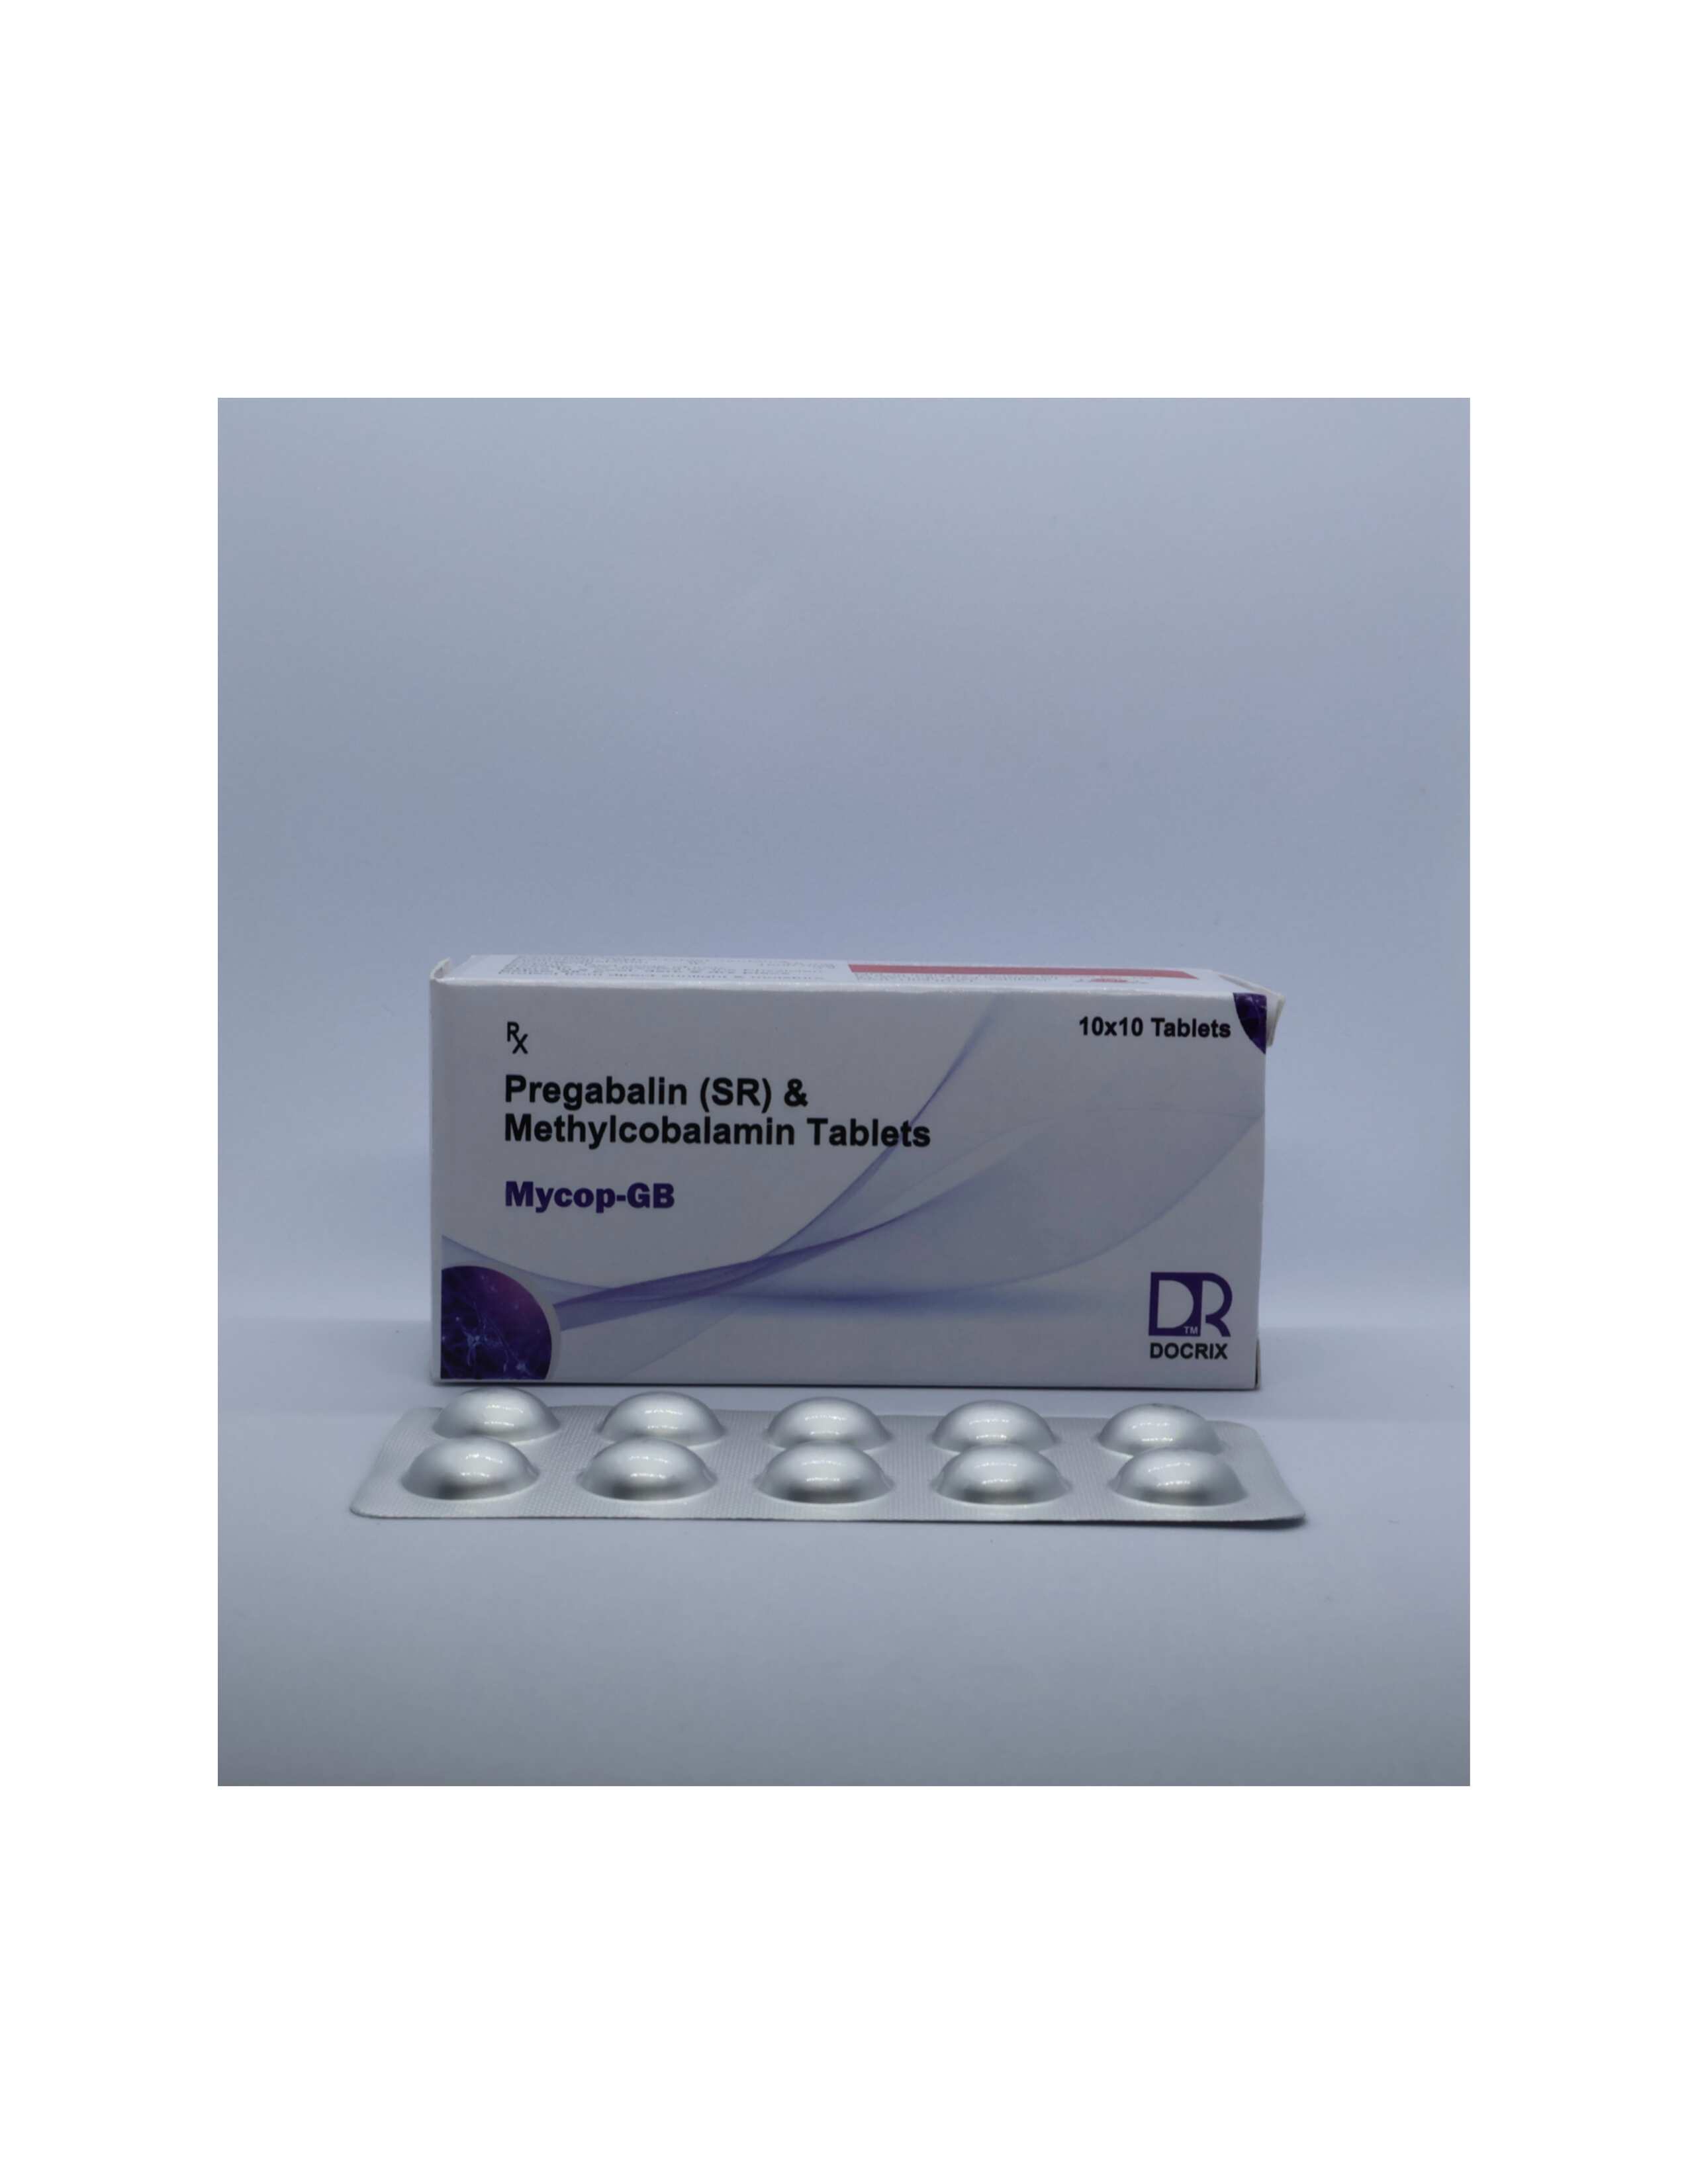 Product Name: Mycop GB, Compositions of Mycop GB are Pregabalin (SR) & Methylcobalamin Tablets - Docrix Healthcare